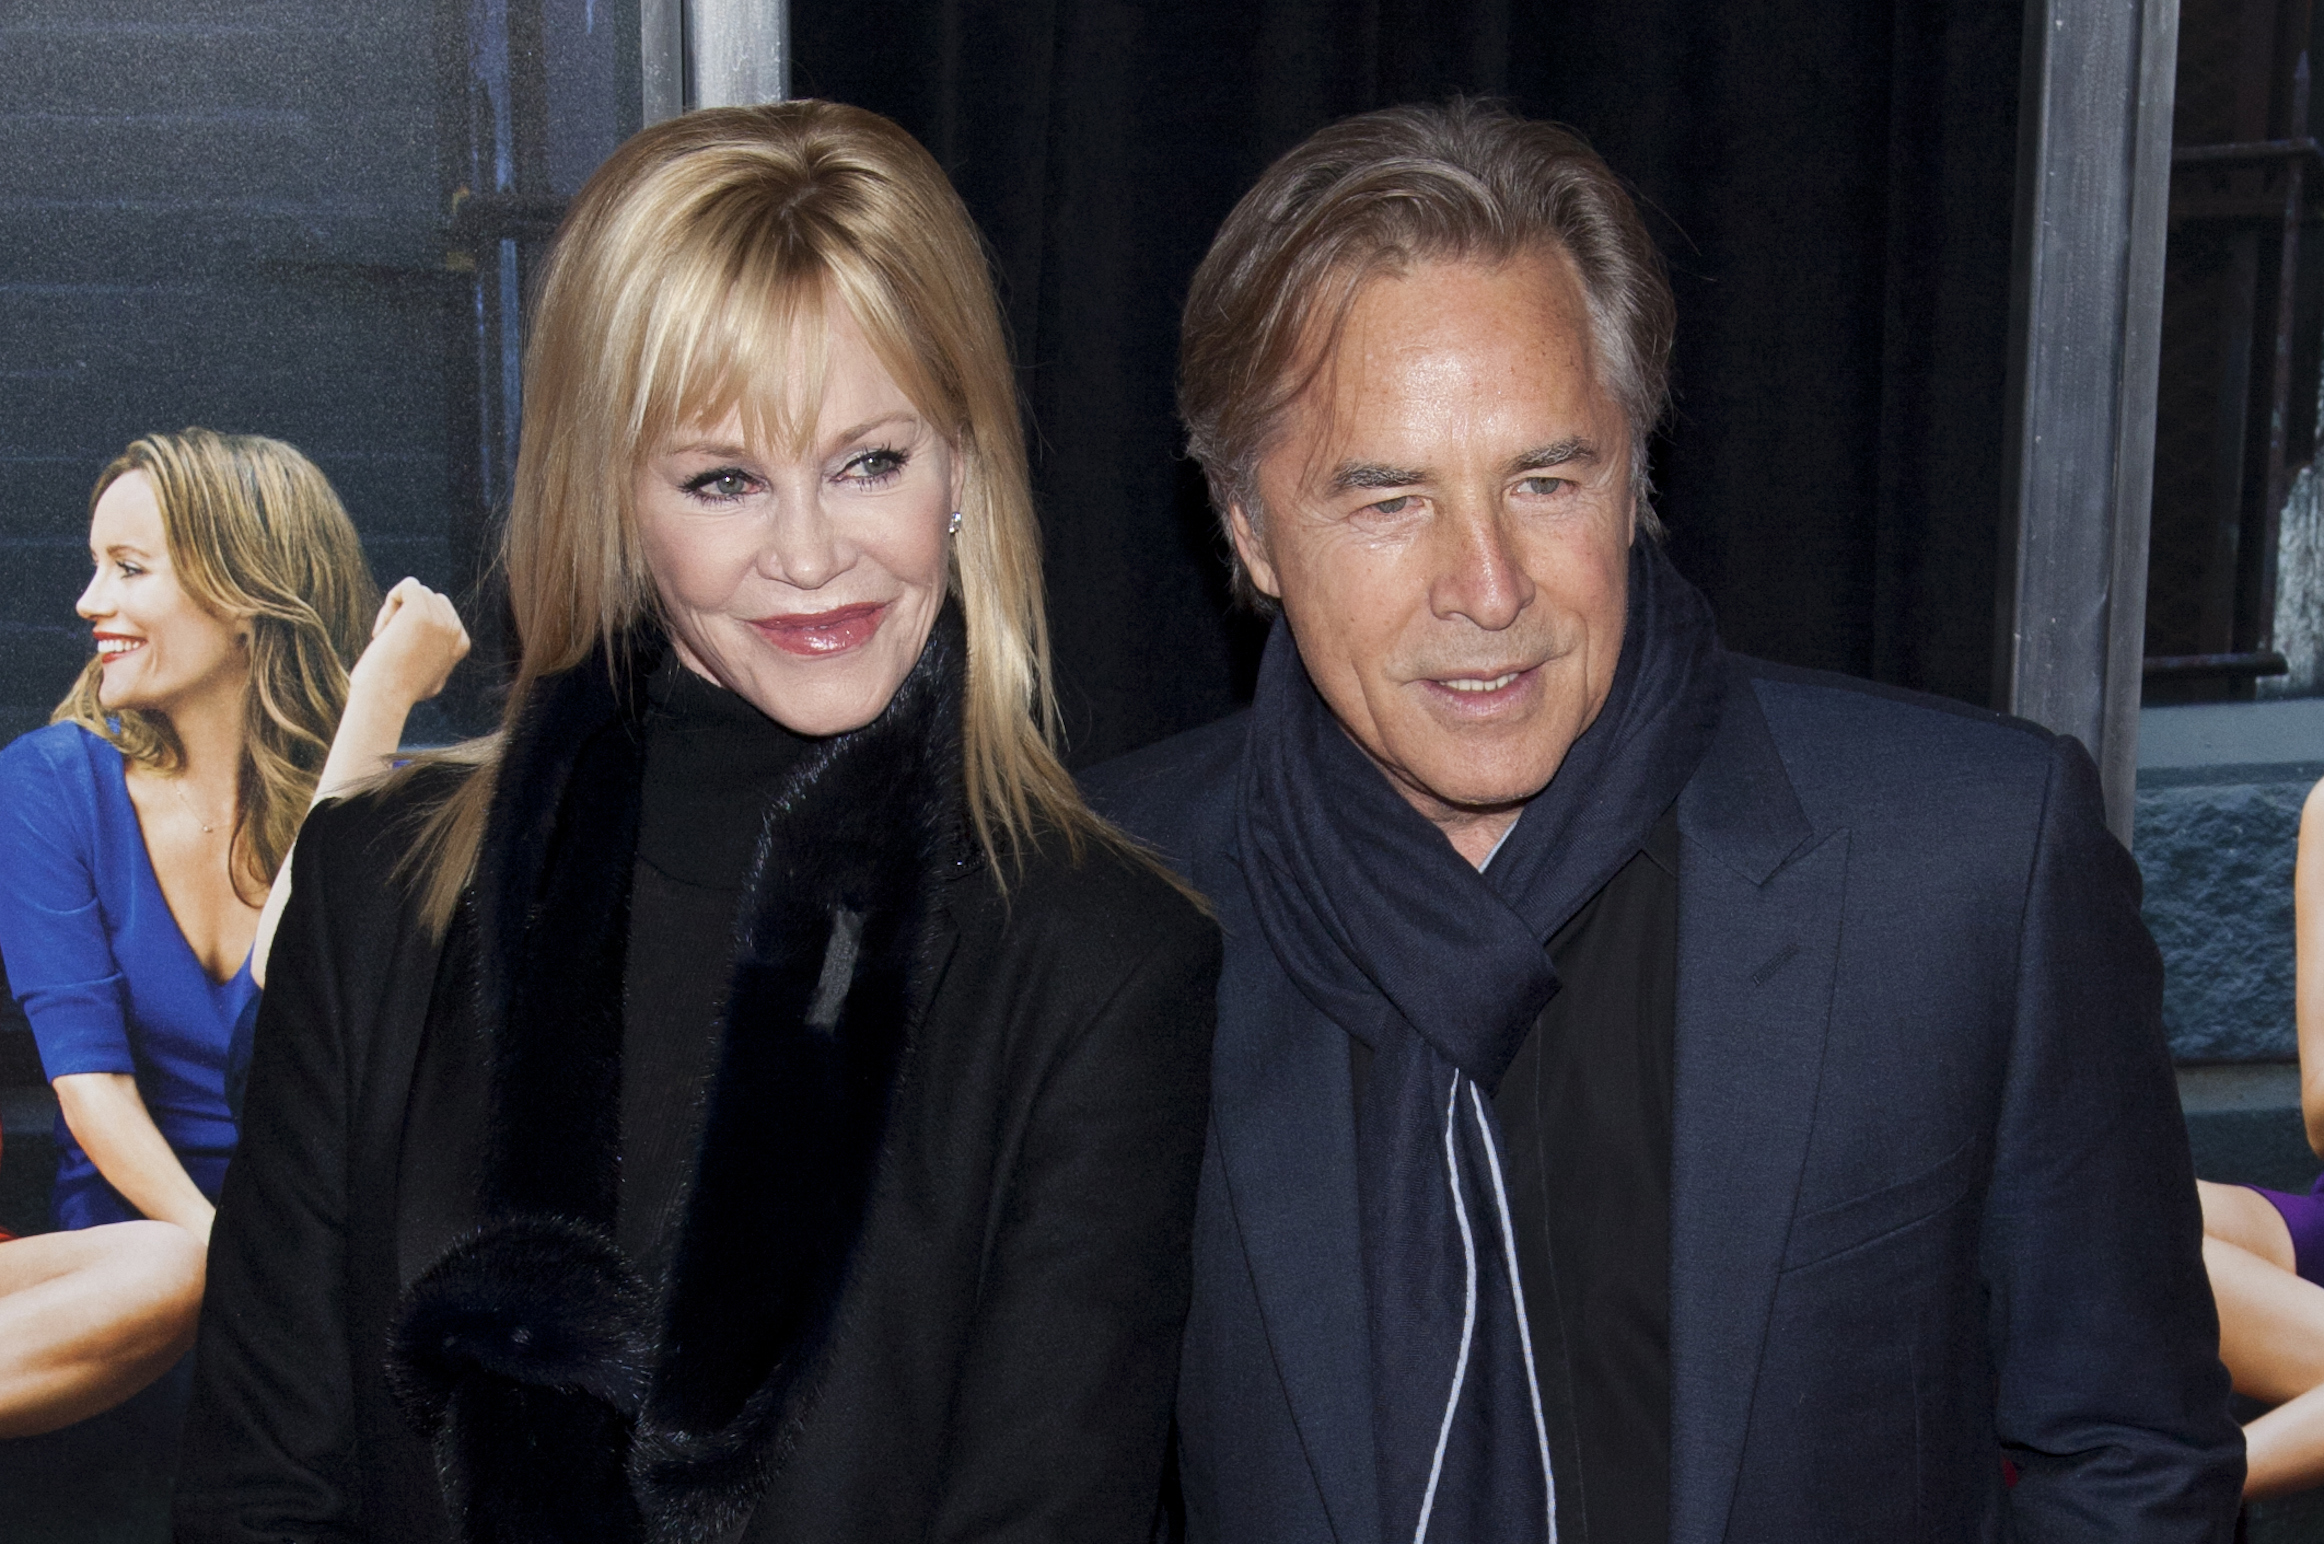 Melanie Griffith and Don Johnson attend the "How To Be Single" premiere in New York City on February 3, 2016. | Source: Getty Images